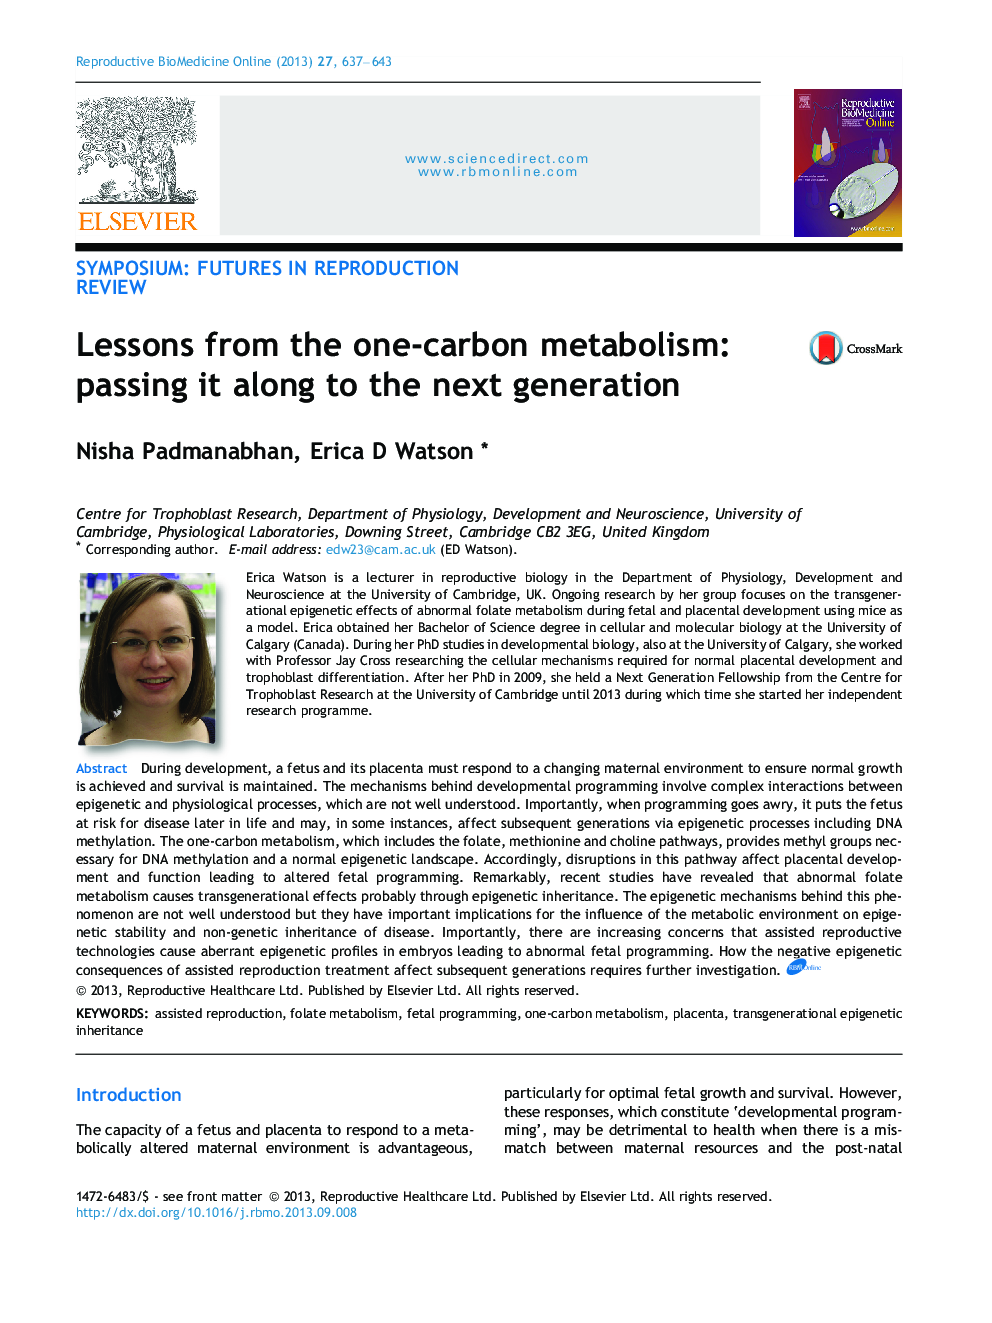 Lessons from the one-carbon metabolism: passing it along to the next generation 